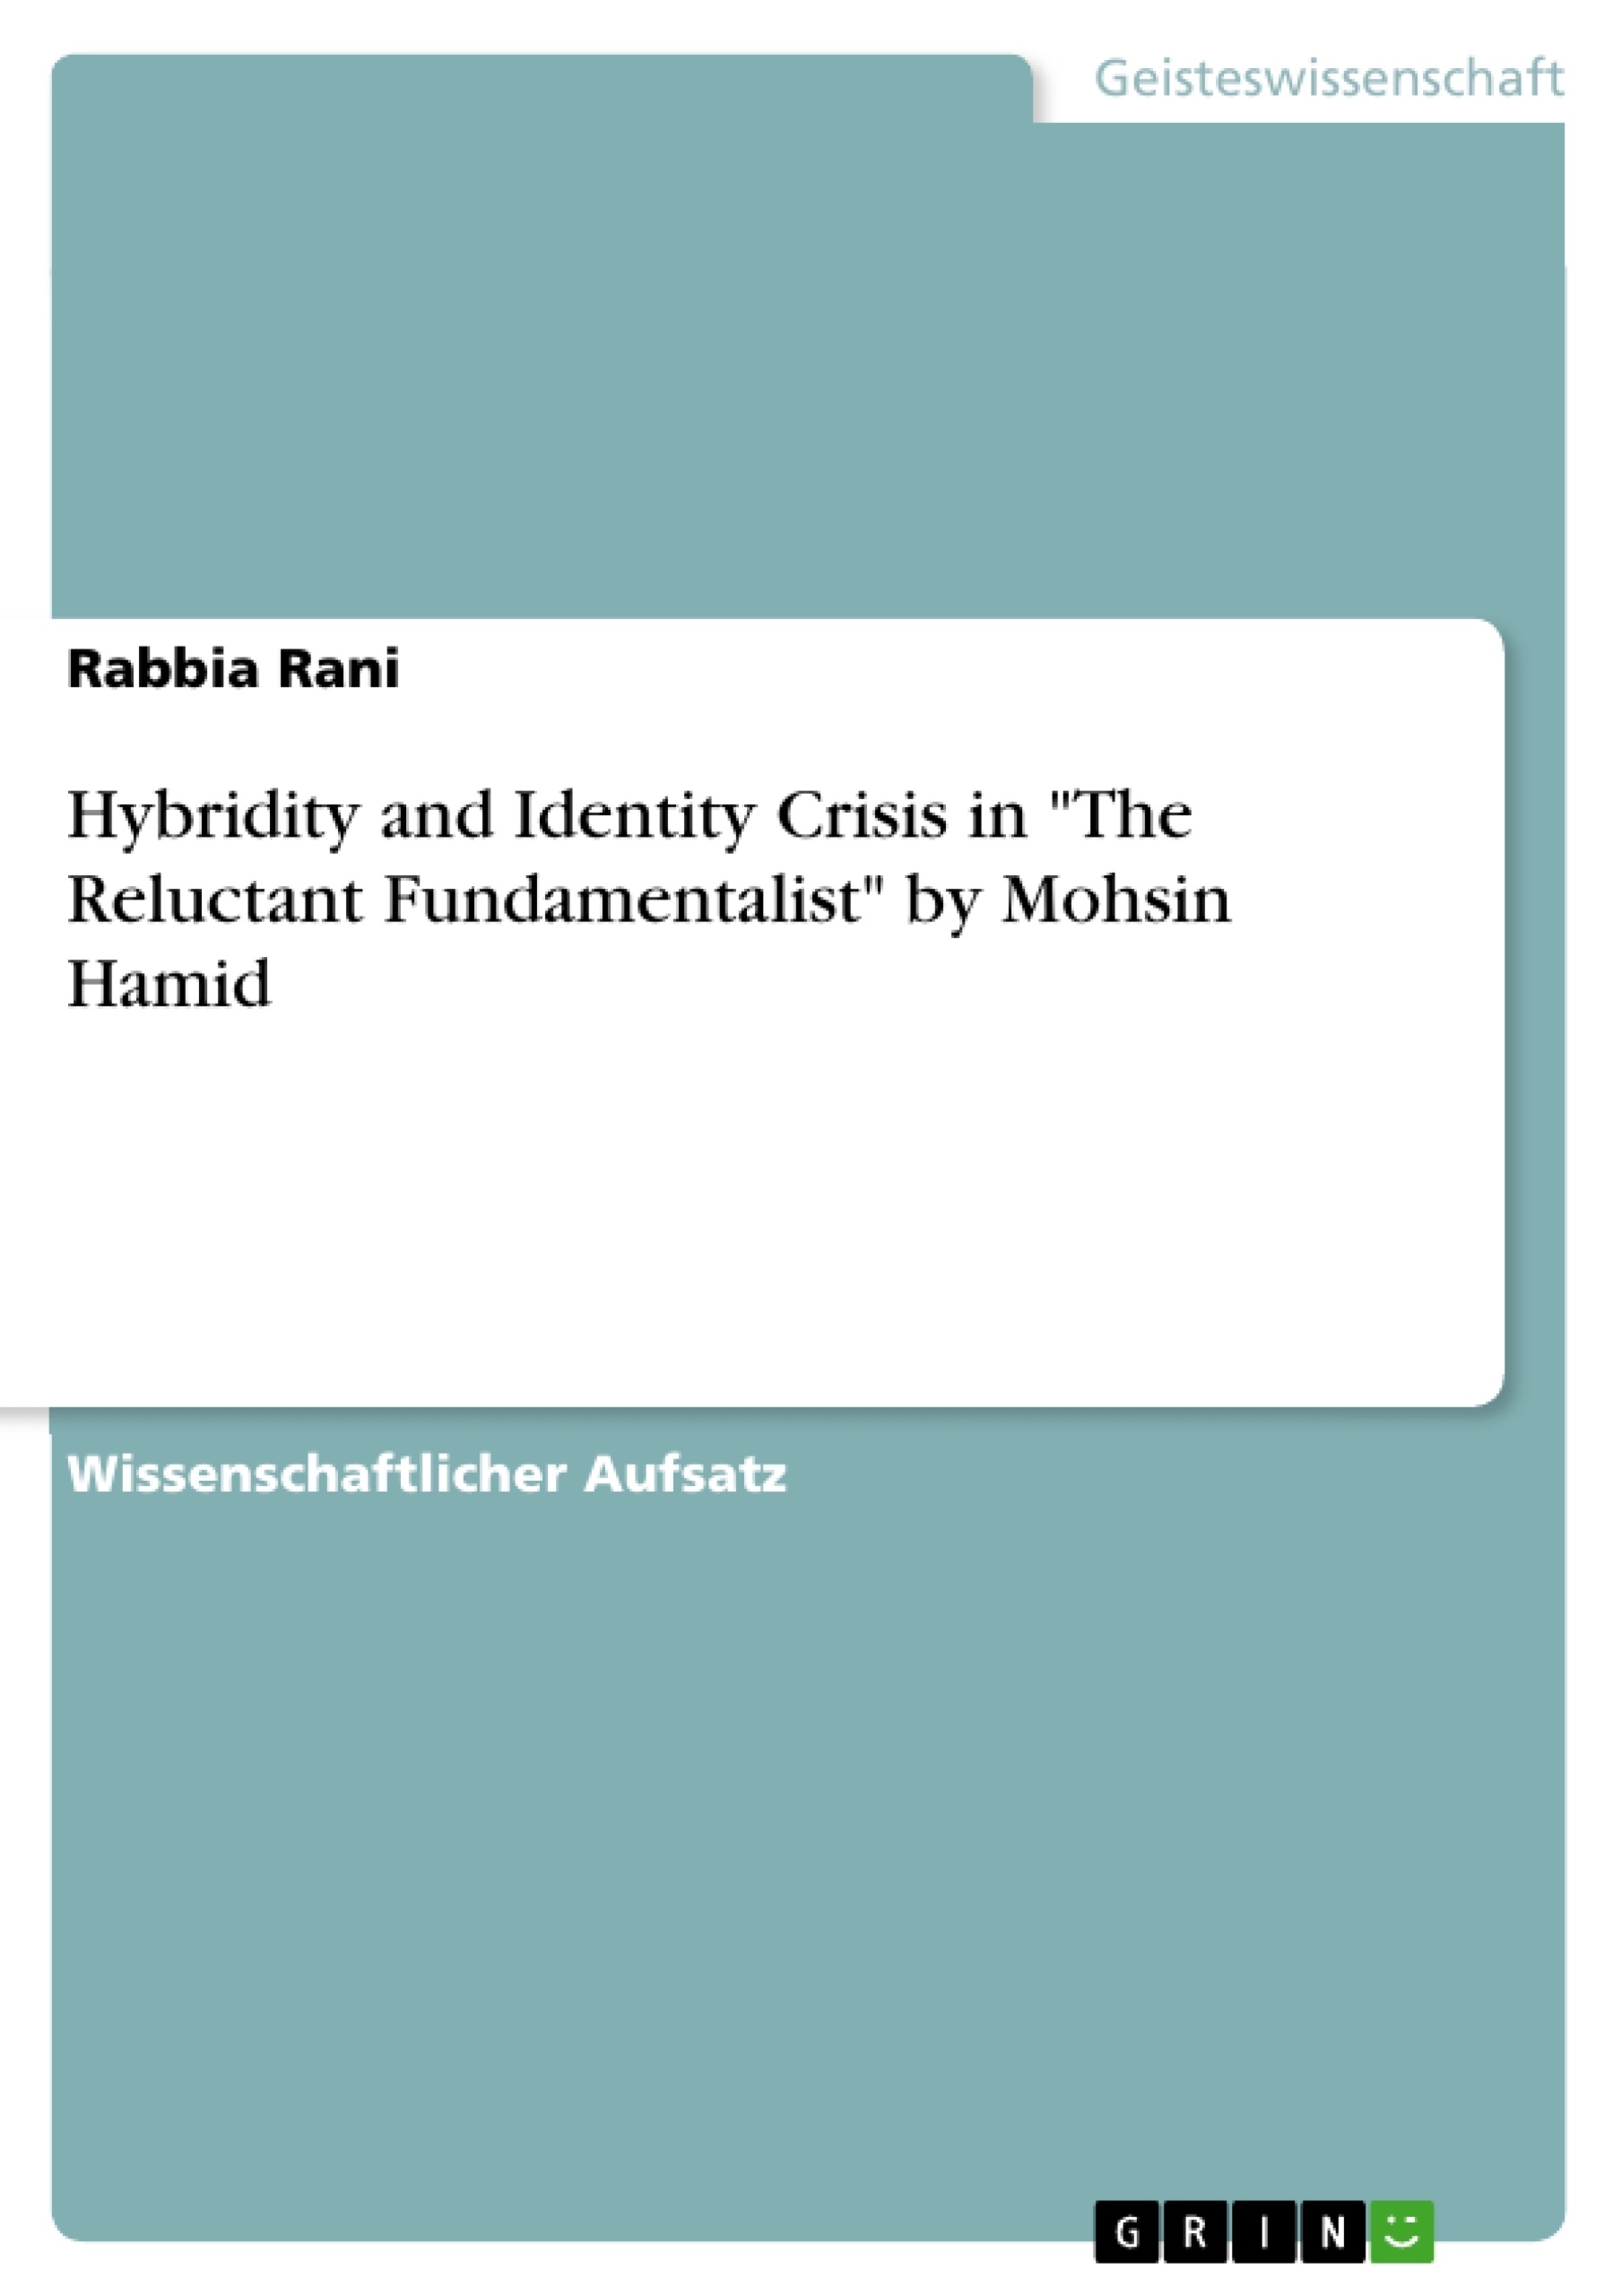 Titel: Hybridity and Identity Crisis in "The Reluctant Fundamentalist" by Mohsin Hamid